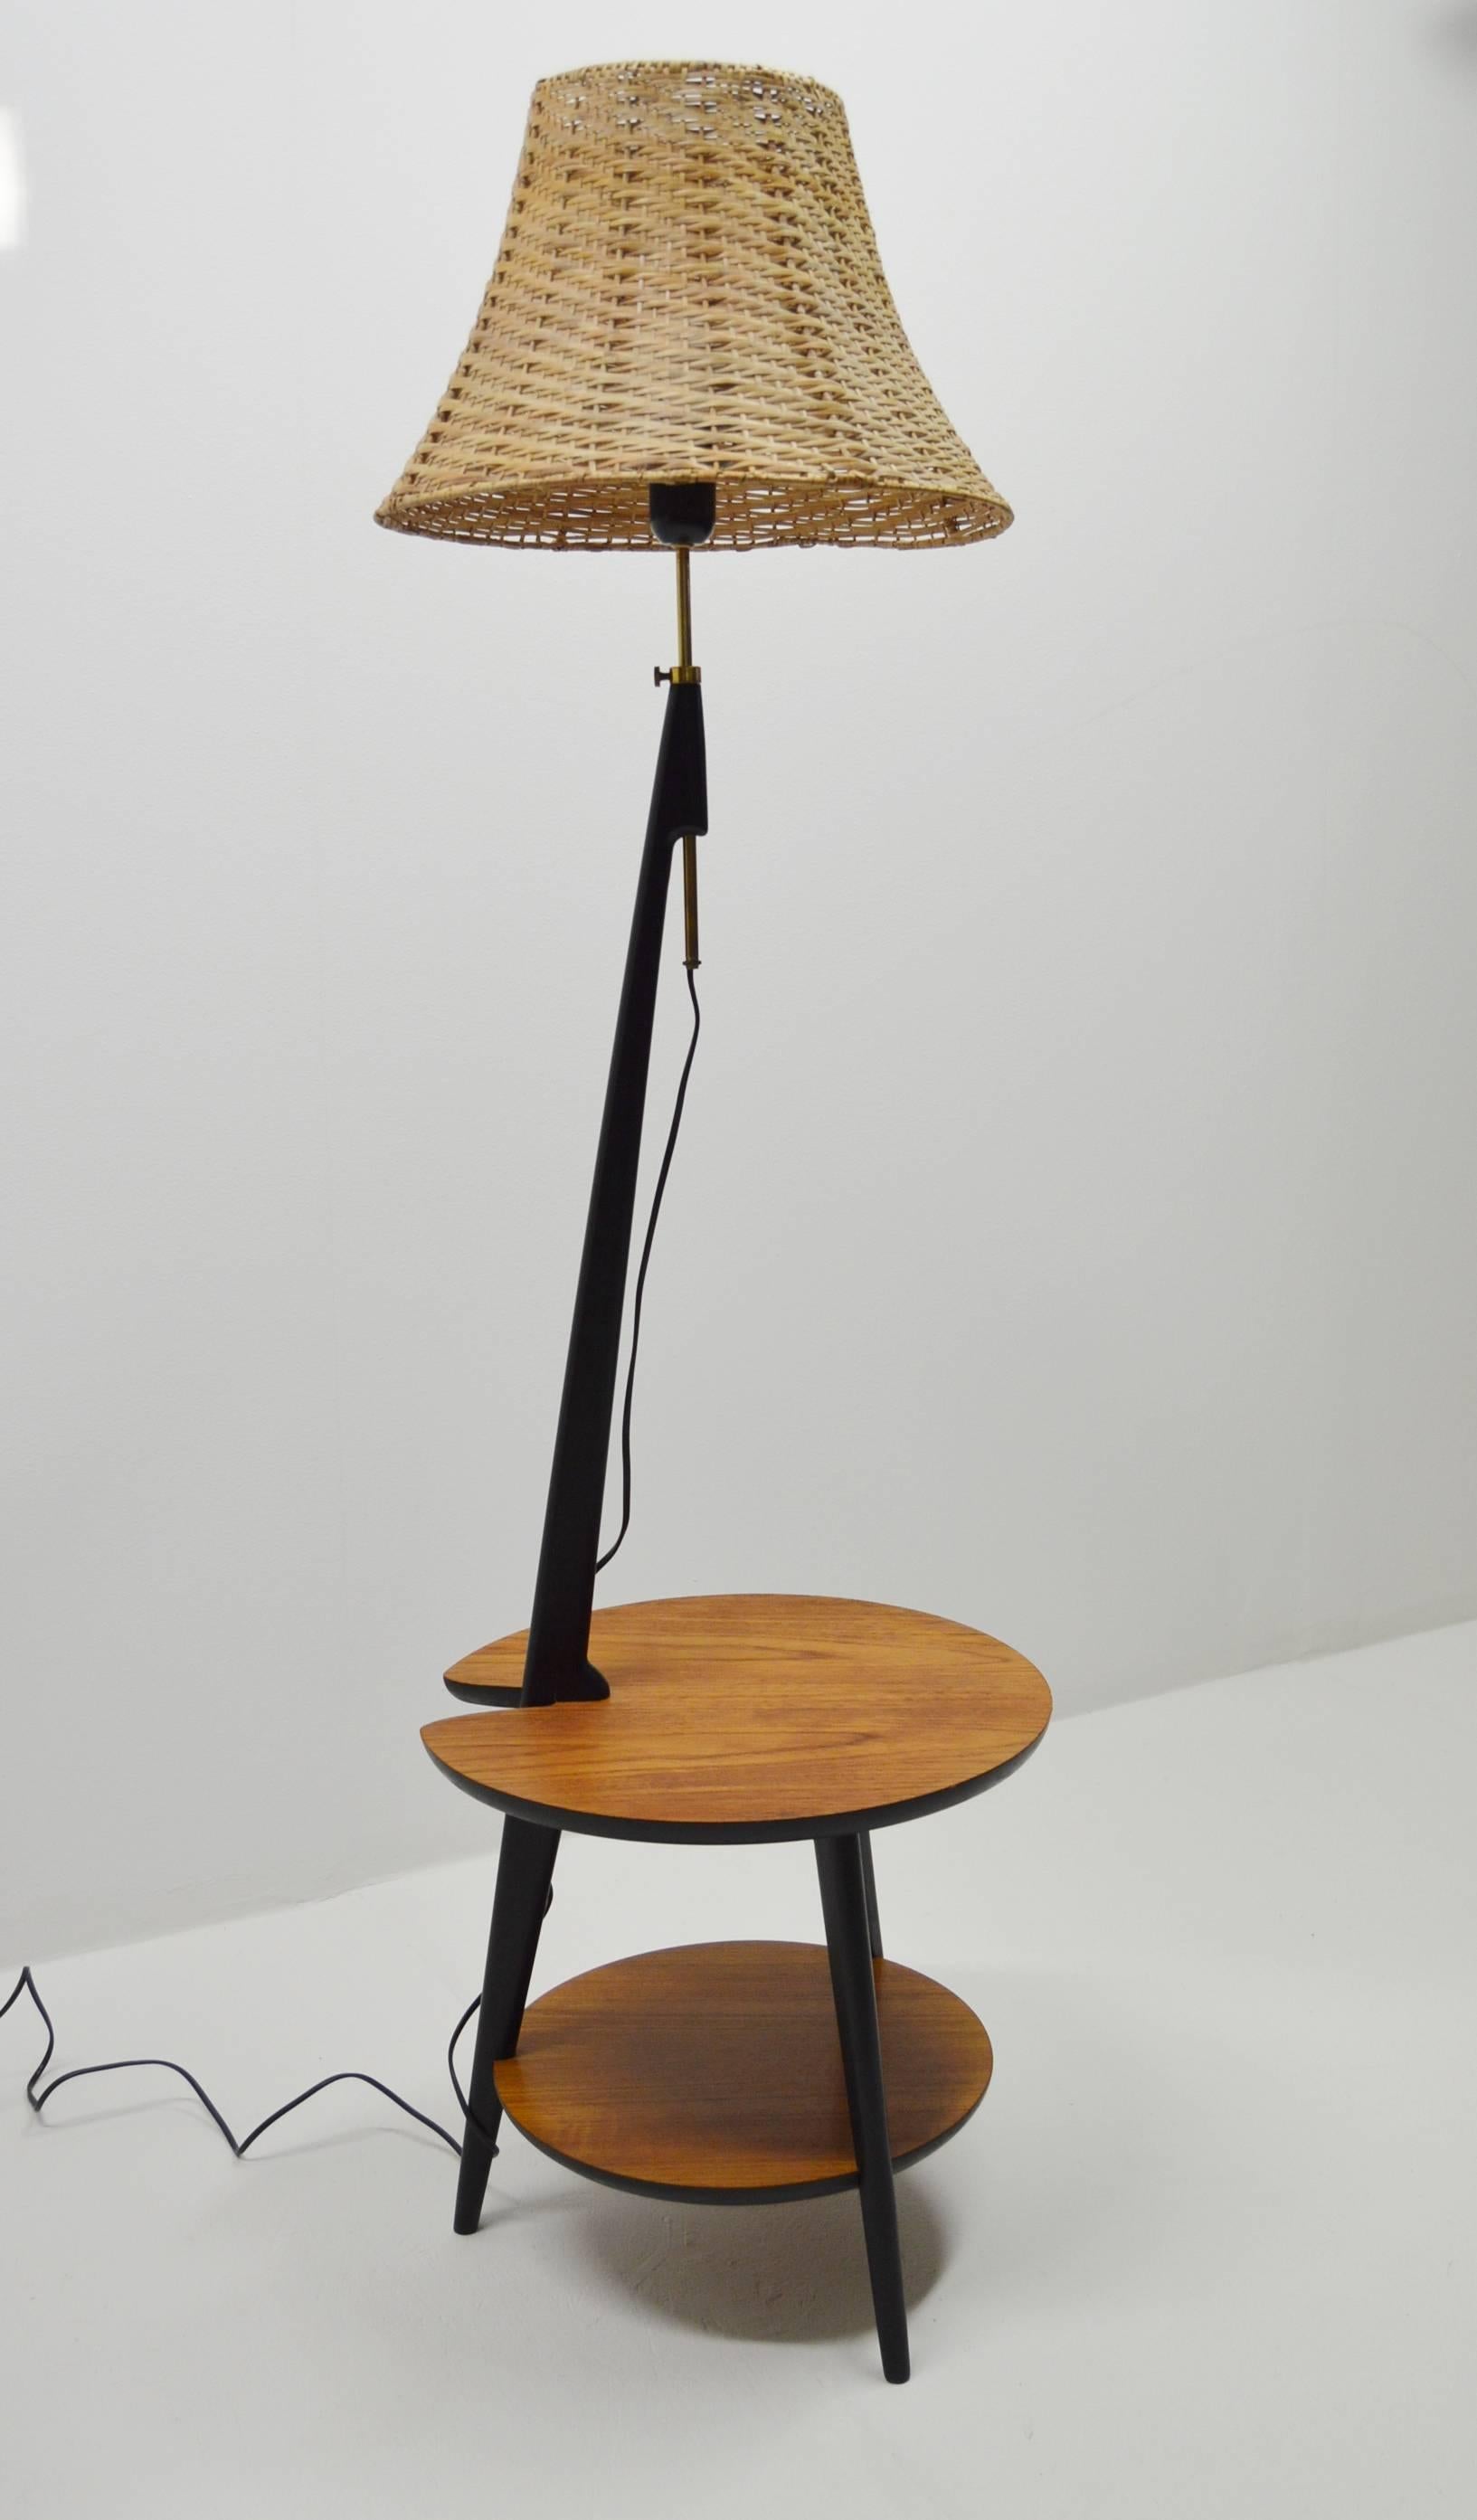 Rare table with built in lamp or contrariwise.
Teak table with minor marks. Lampshade of rattan. Base of black lacquered wood and brass fittings.

Produced in Scandinavia during the 1960s.
     